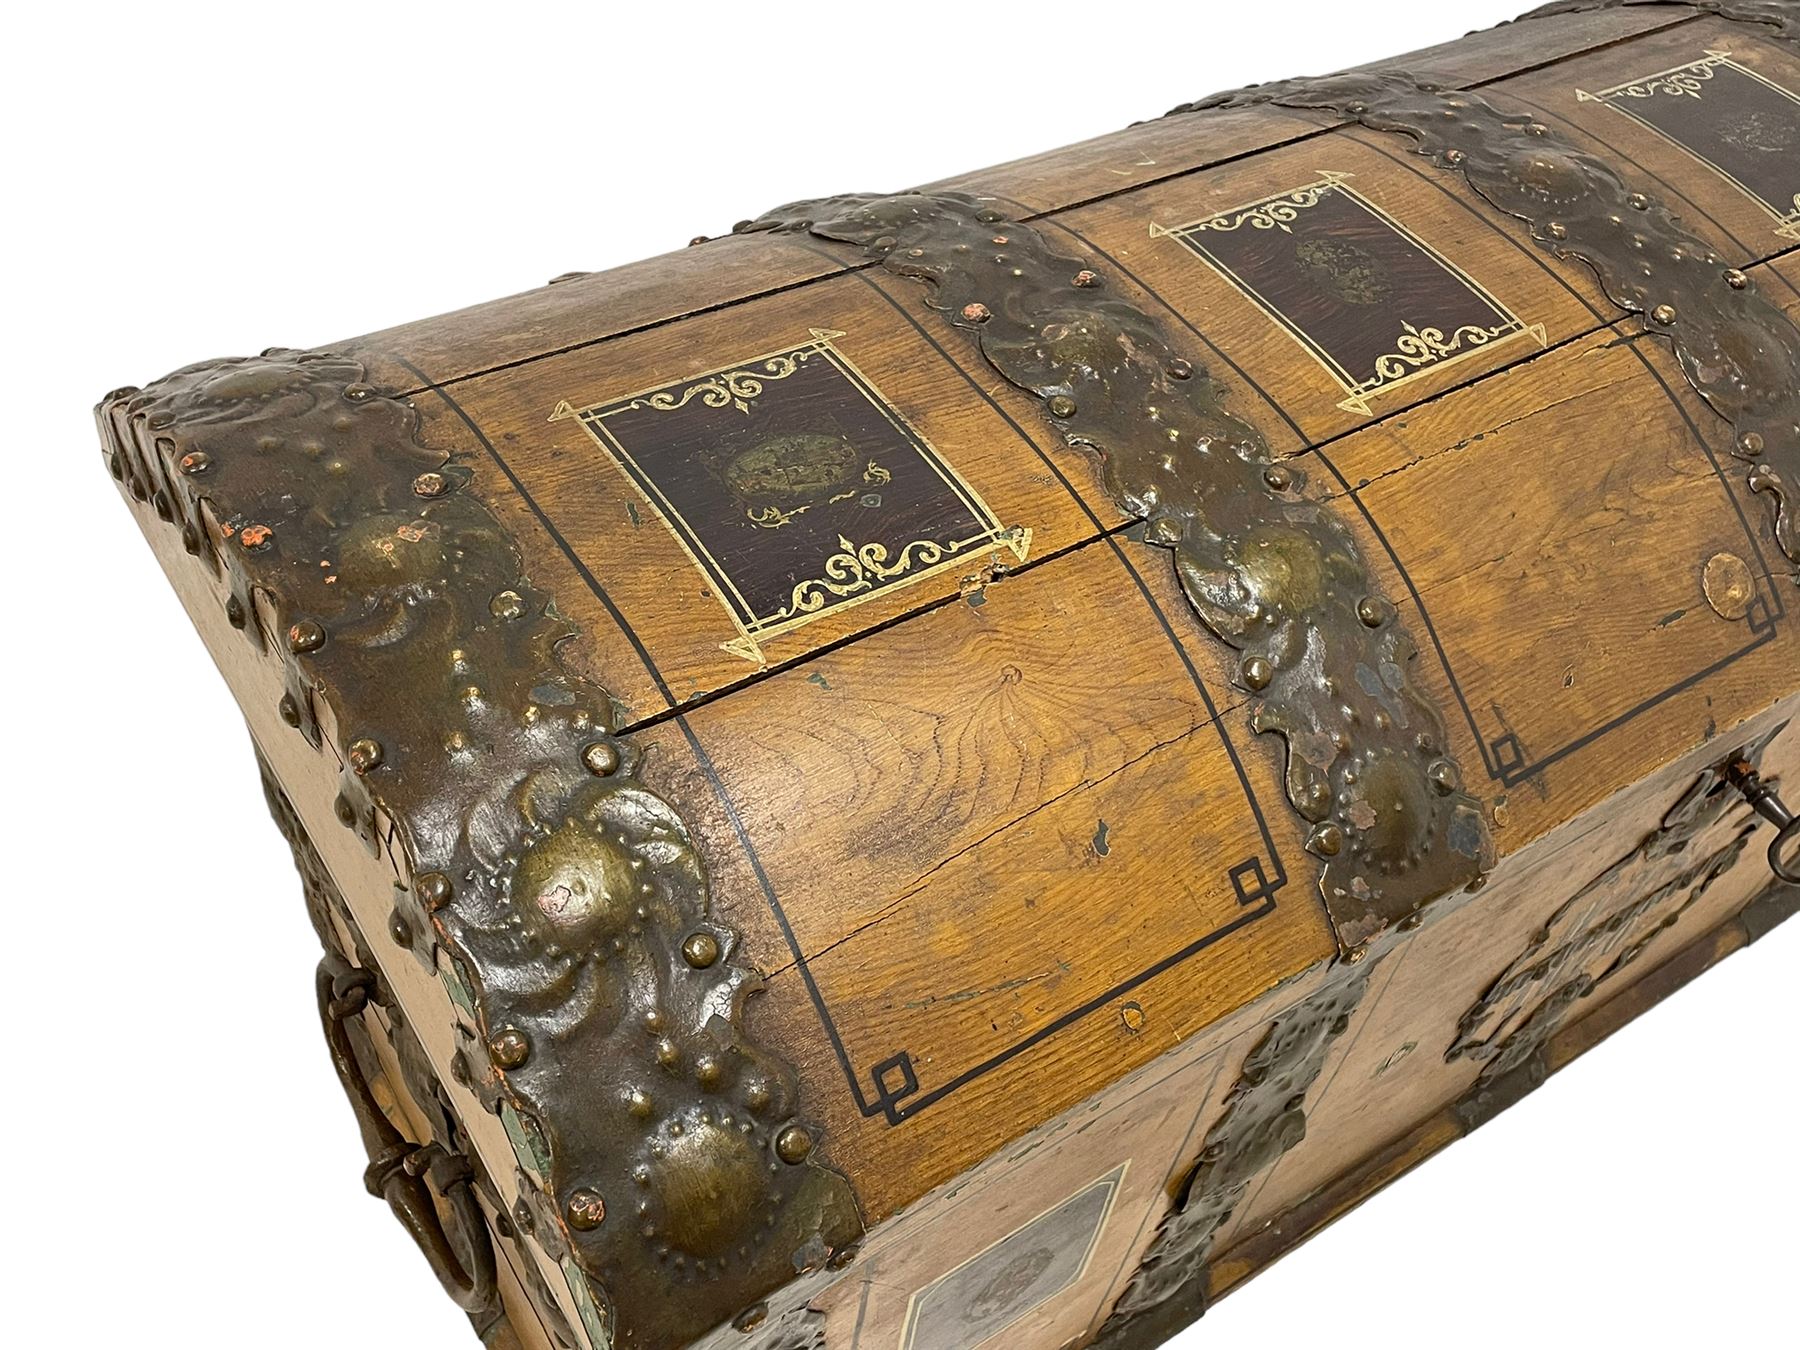 19th century Northern European painted oak sea chest - Image 14 of 29